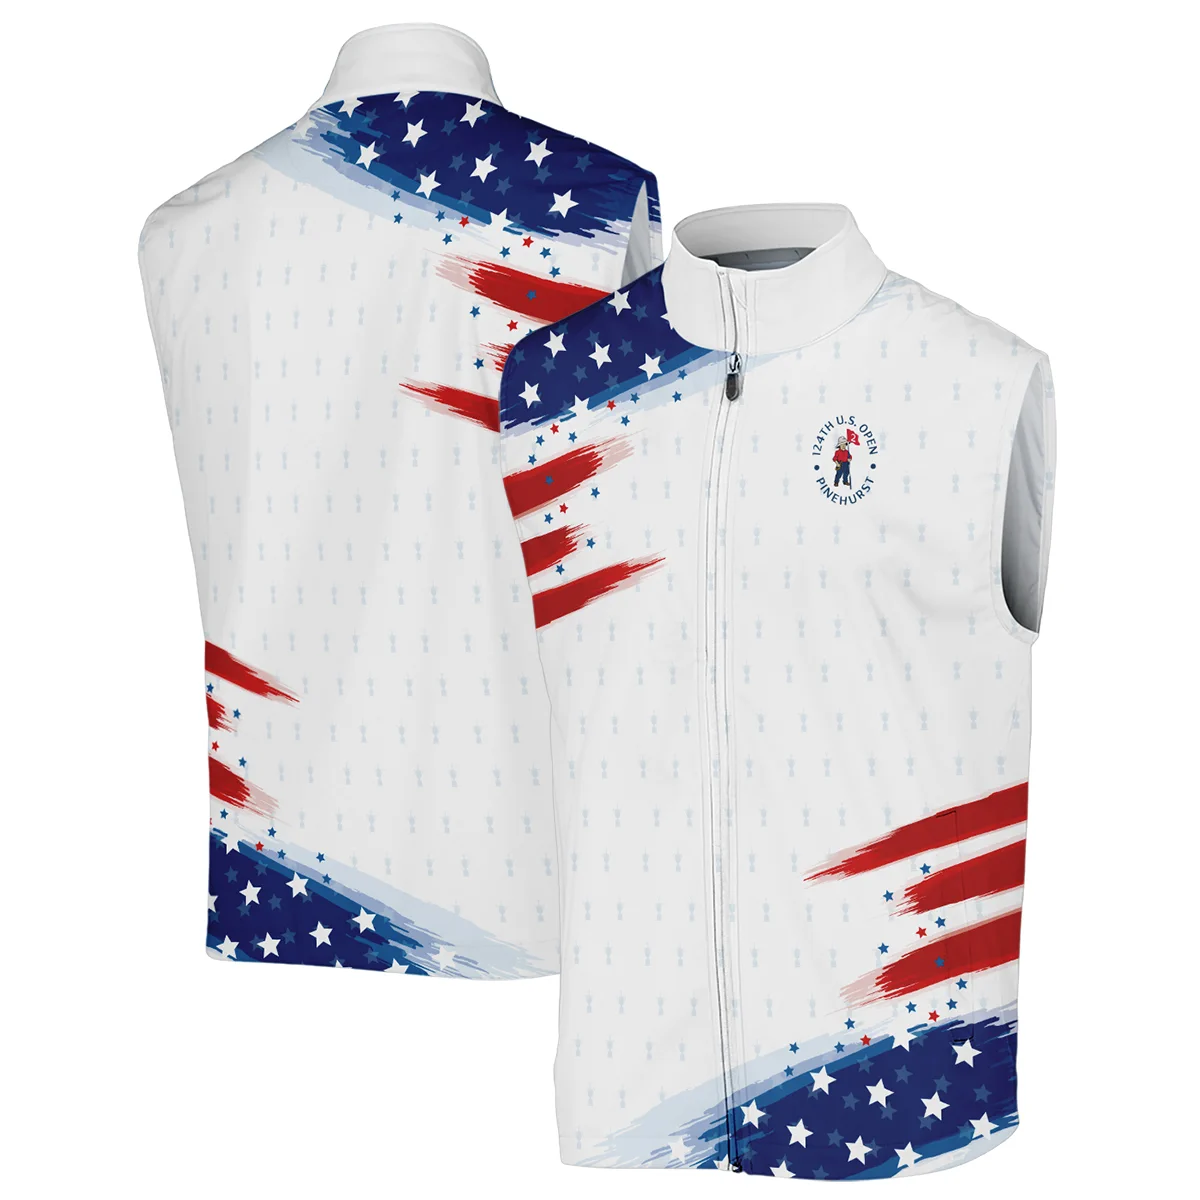 Tournament 124th U.S. Open Pinehurst Ping Stand Colar Jacket Flag American White And Blue All Over Print Stand Colar Jacket